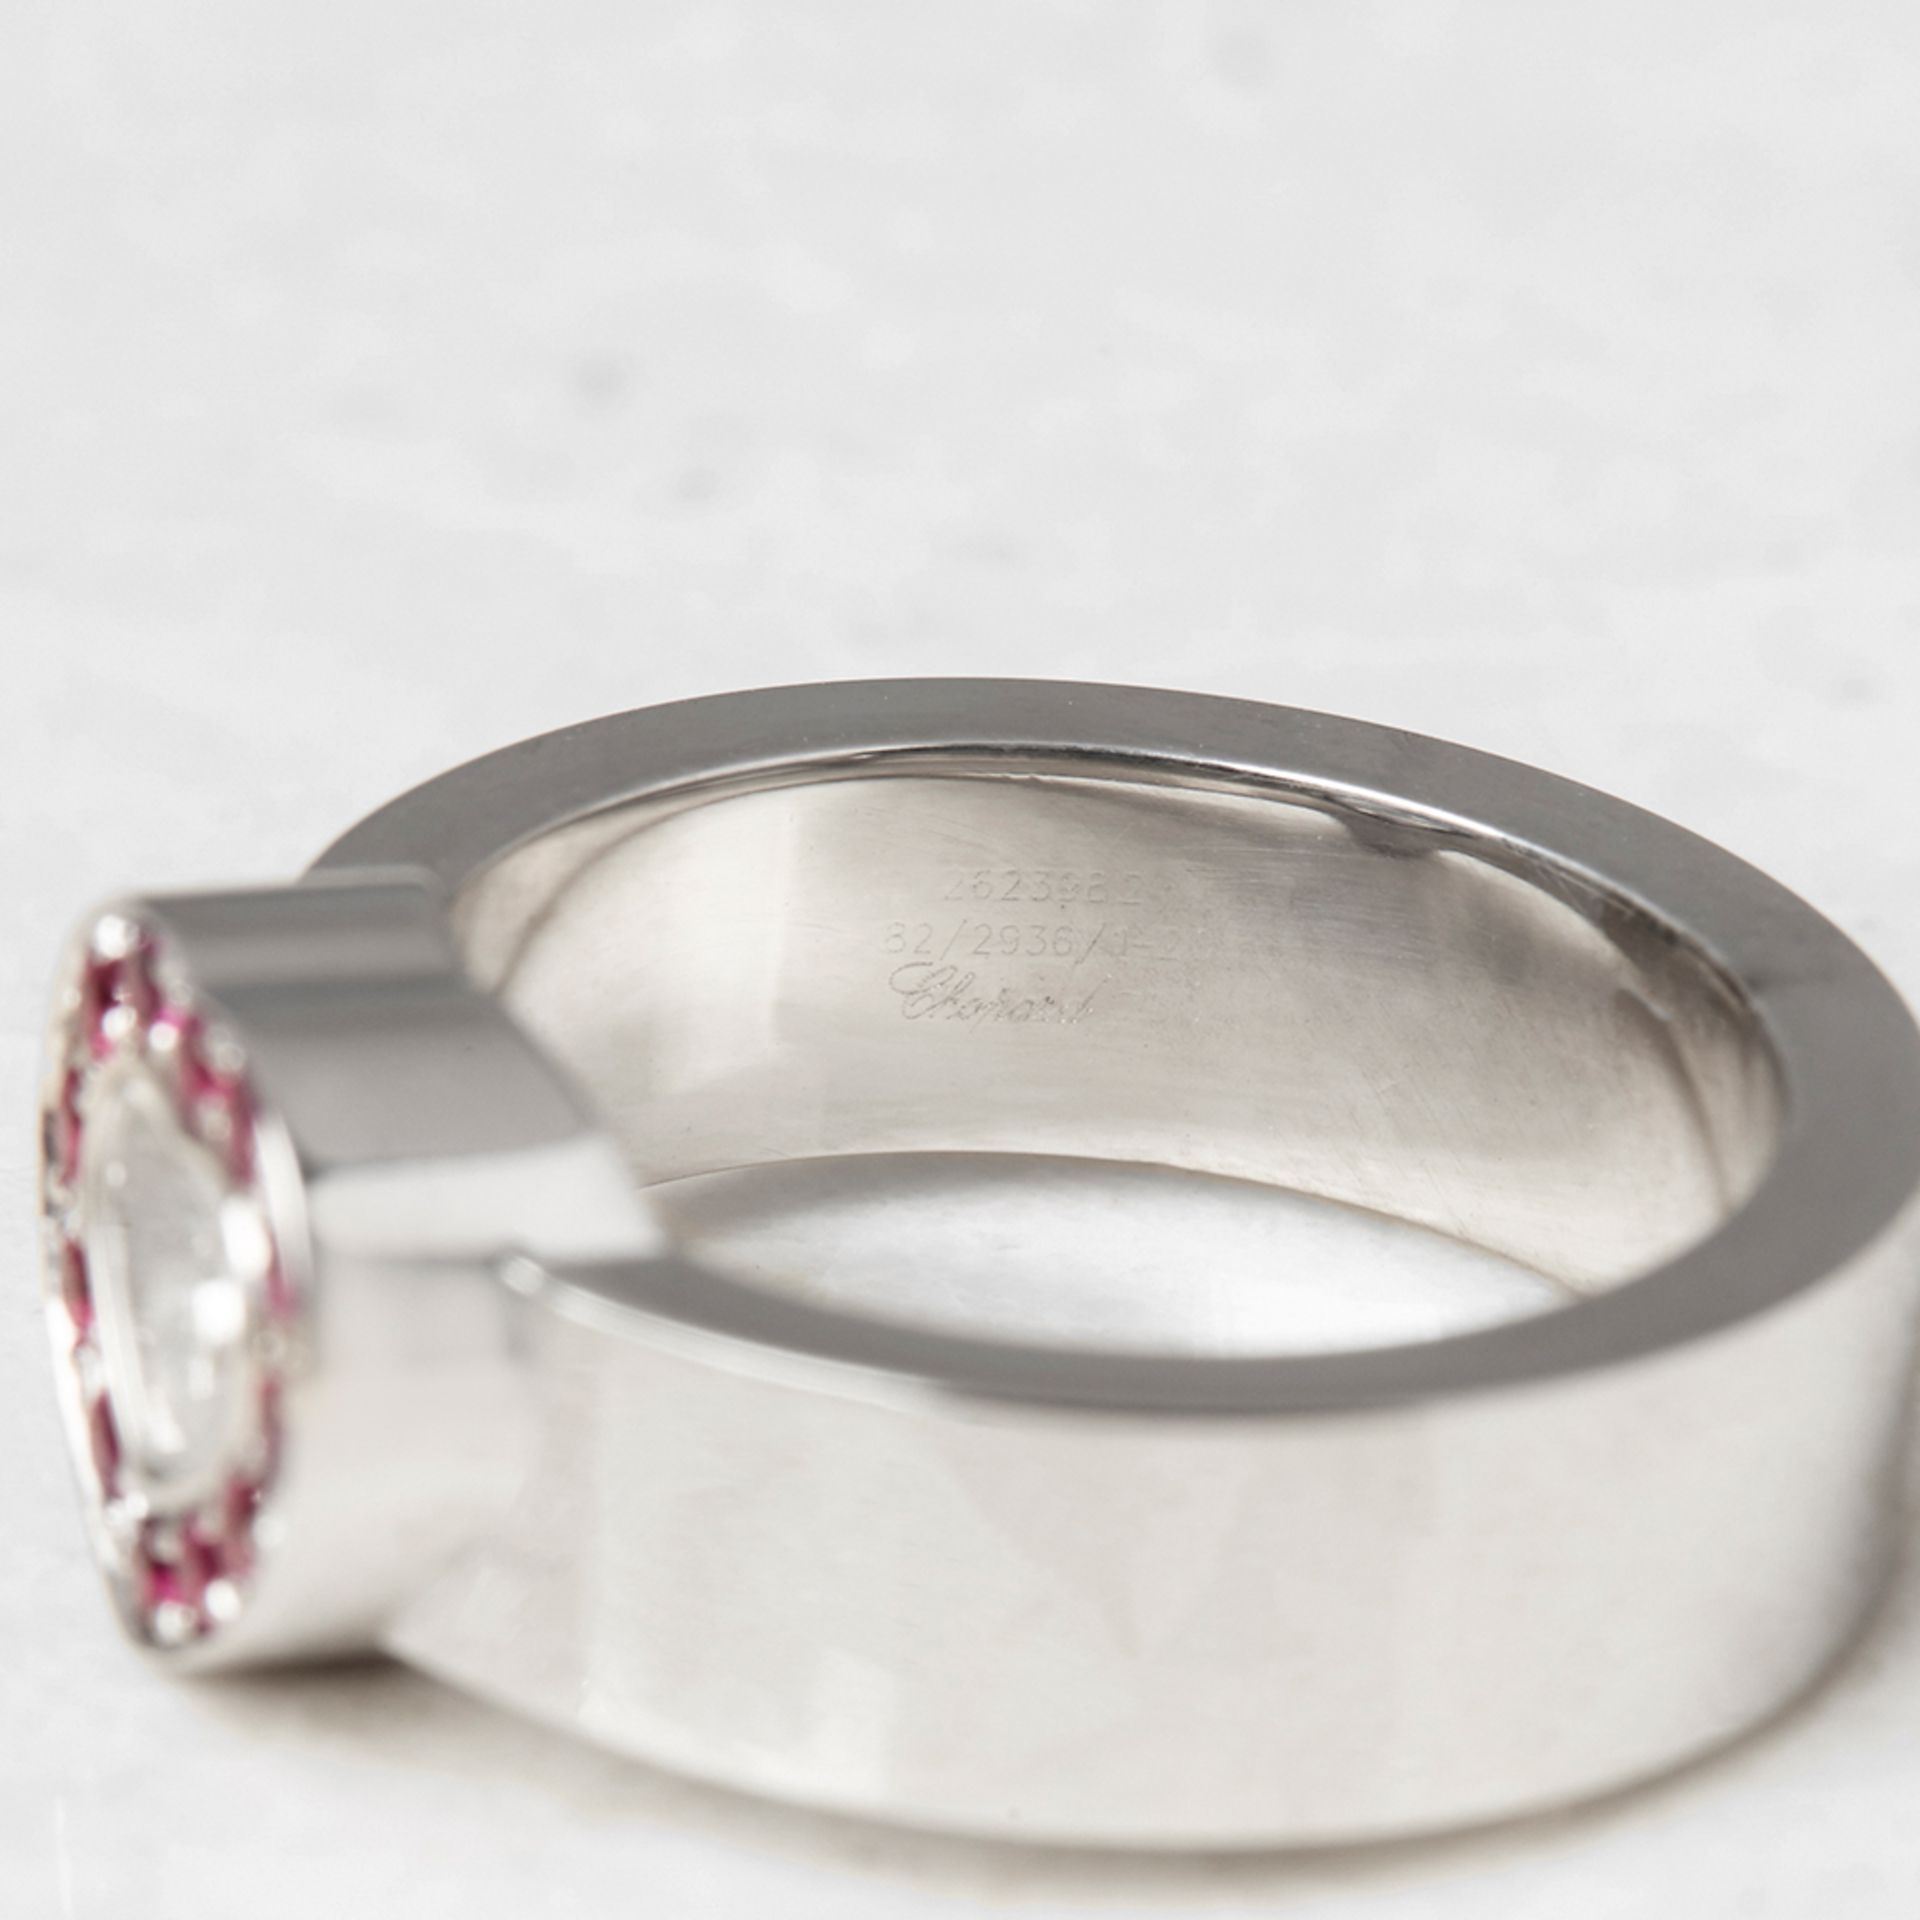 Chopard 18k White Gold Happy Diamonds Ruby Ring - Image 7 of 7